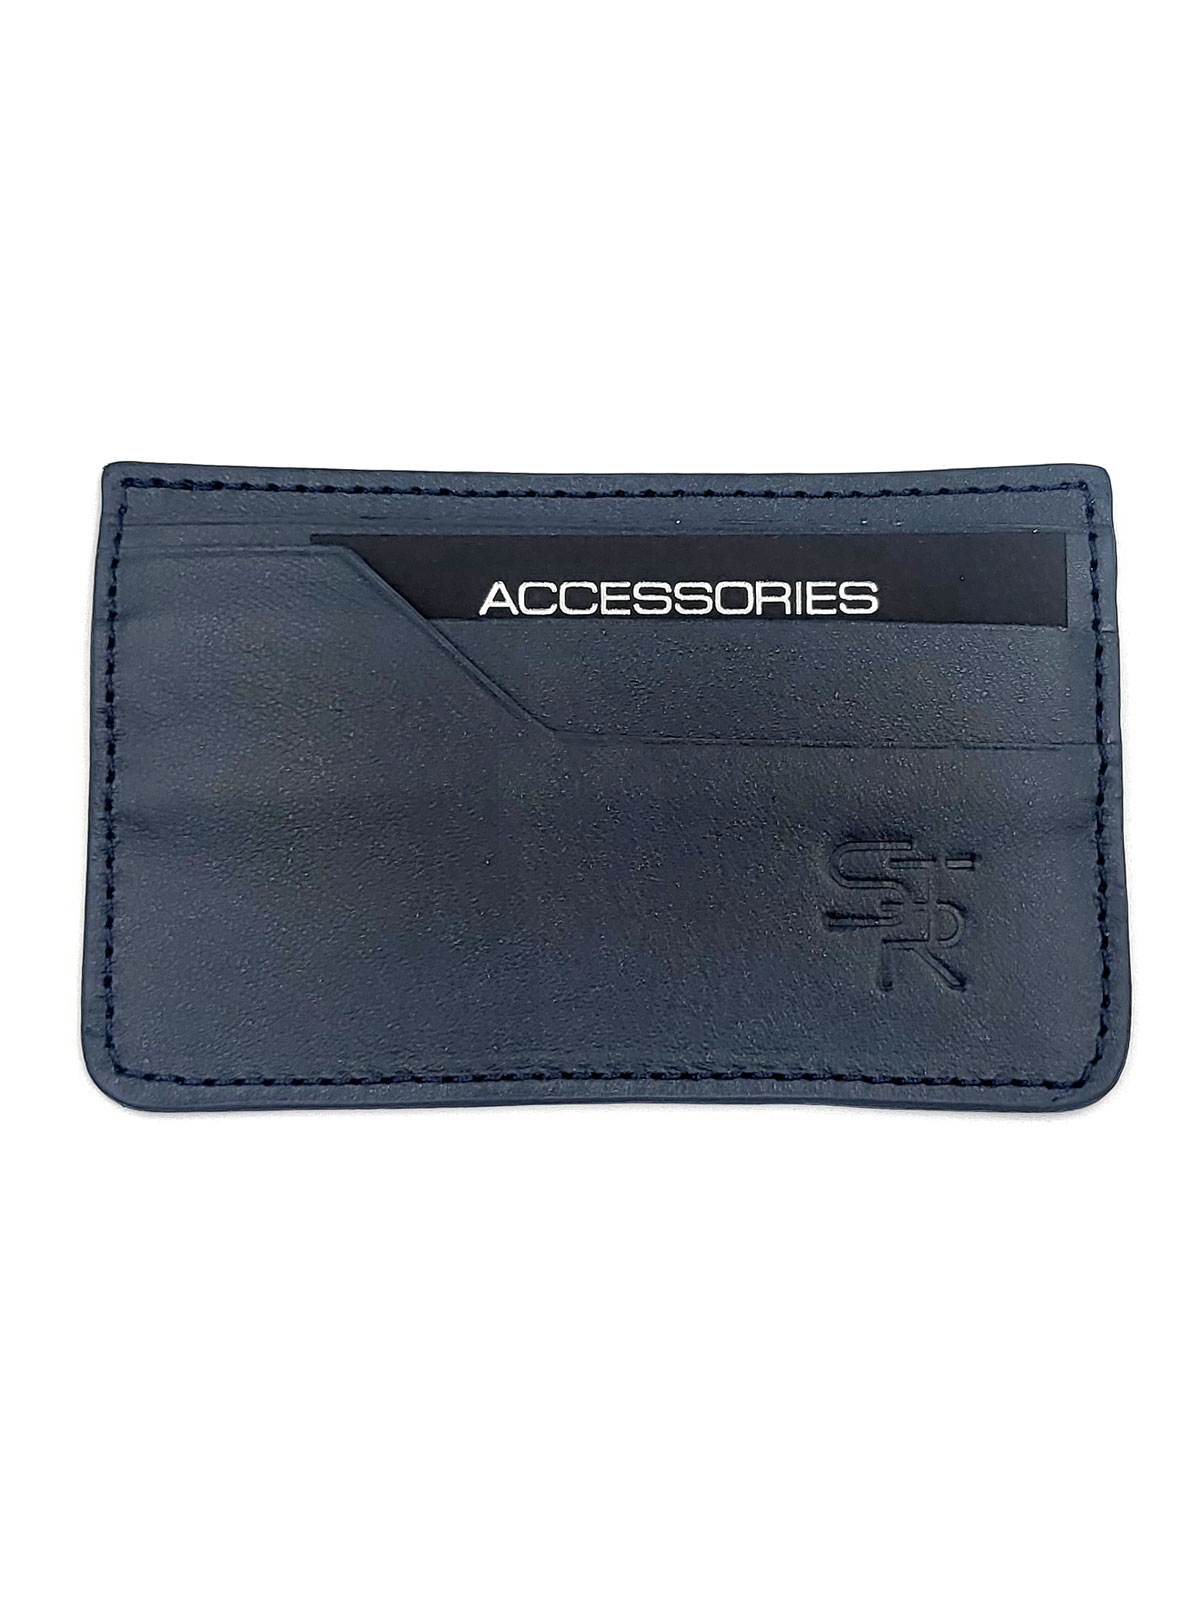 Document case in blue - 10854 - € 14.06 img2